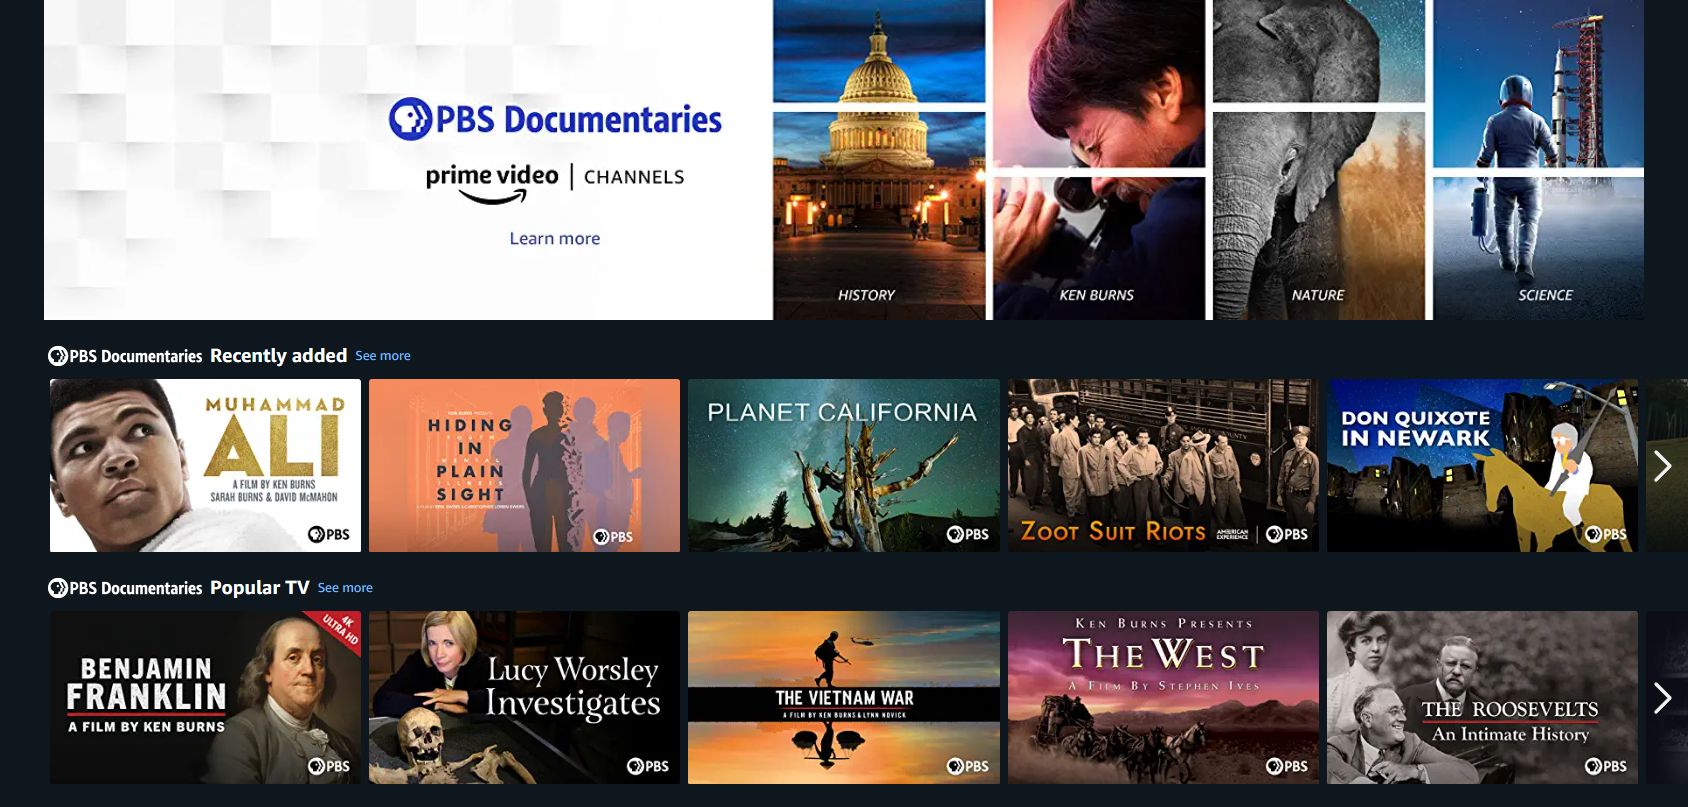 pbs documentaries prime video channel